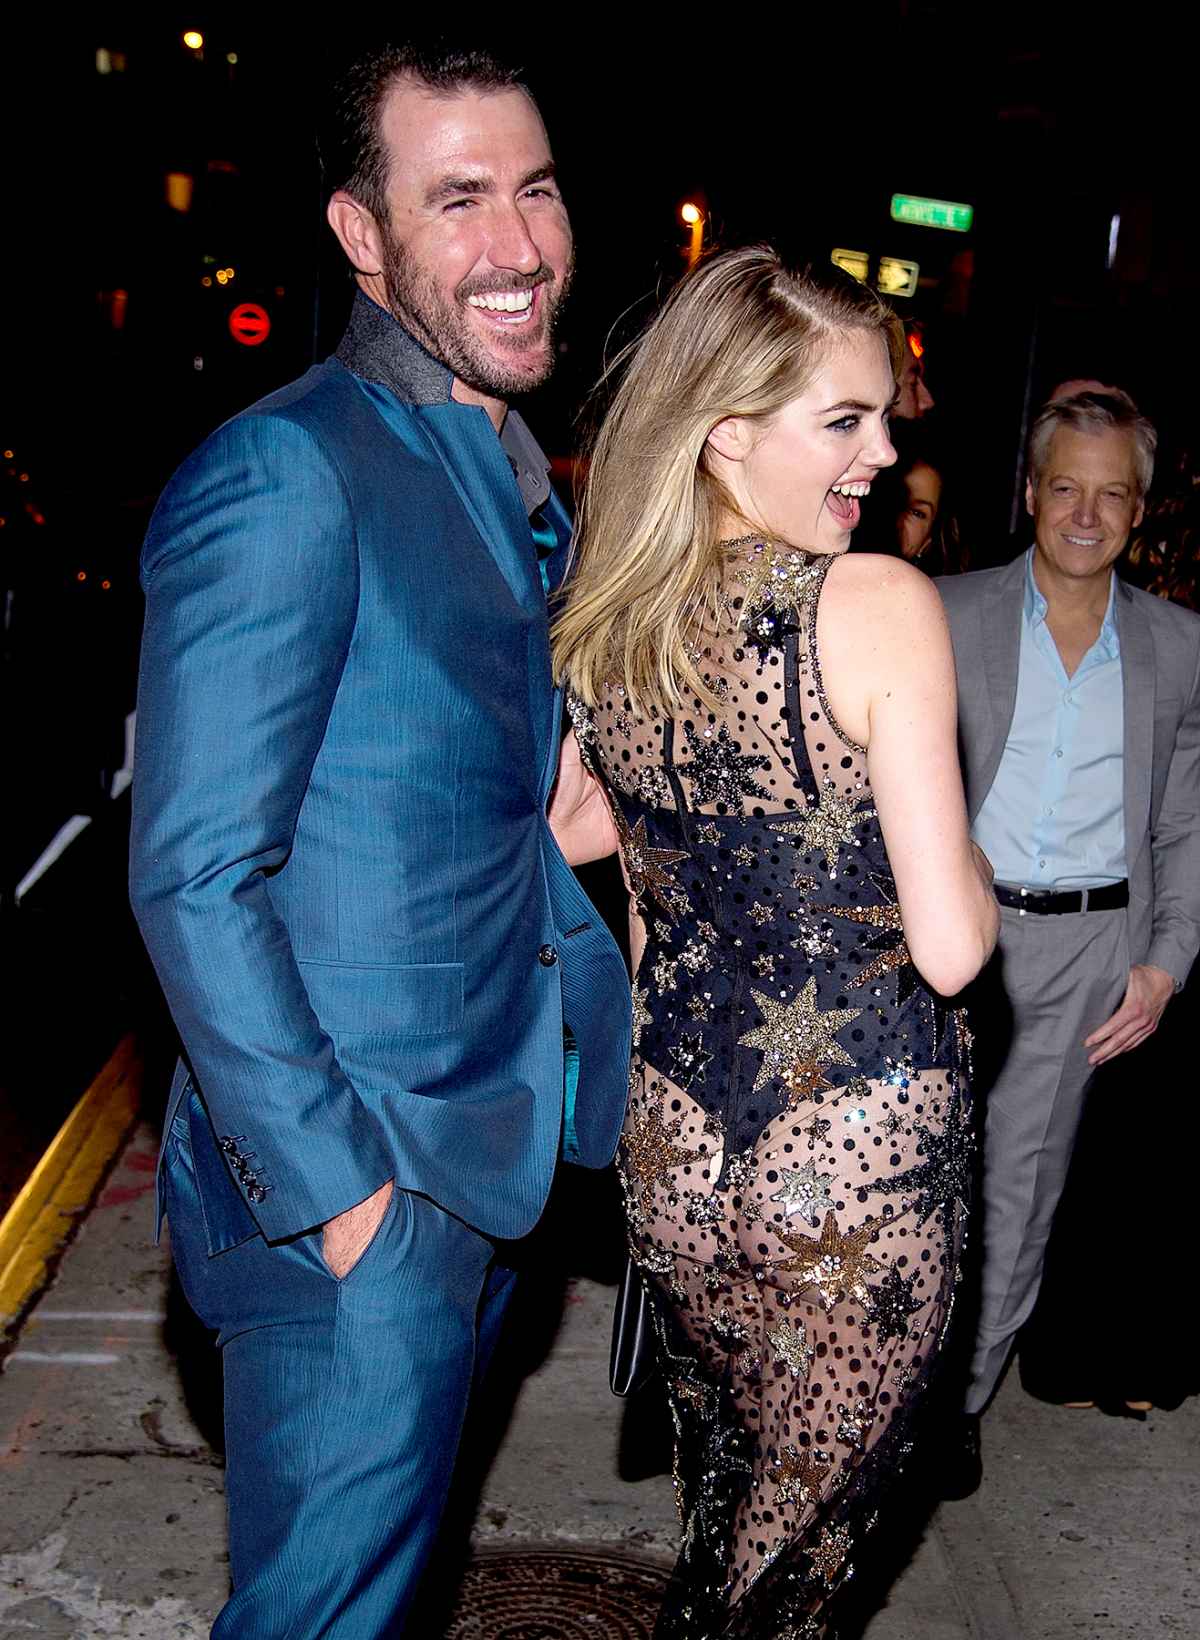 Fans compare Kate Upton and Justin Verlander's relationship to Tom